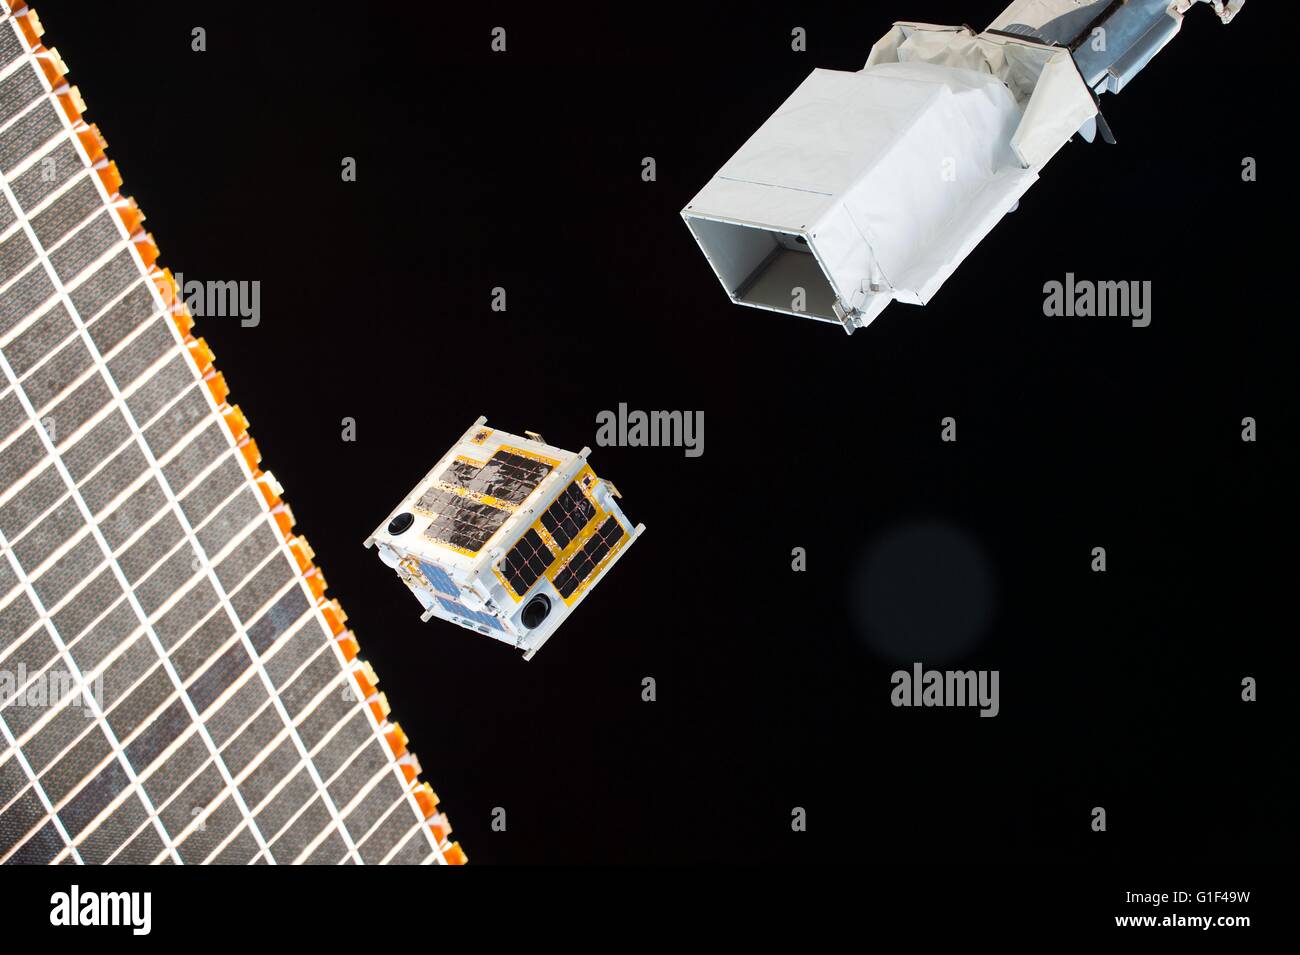 The Japanese Philippine DIWATA-1 satellite is deployed from outside of Kibo module from the International Space Station April 27, 2016 in Earth Orbit. The micro satellite will observe earth and monitor climate changes and is owned by the Philippine government. Stock Photo